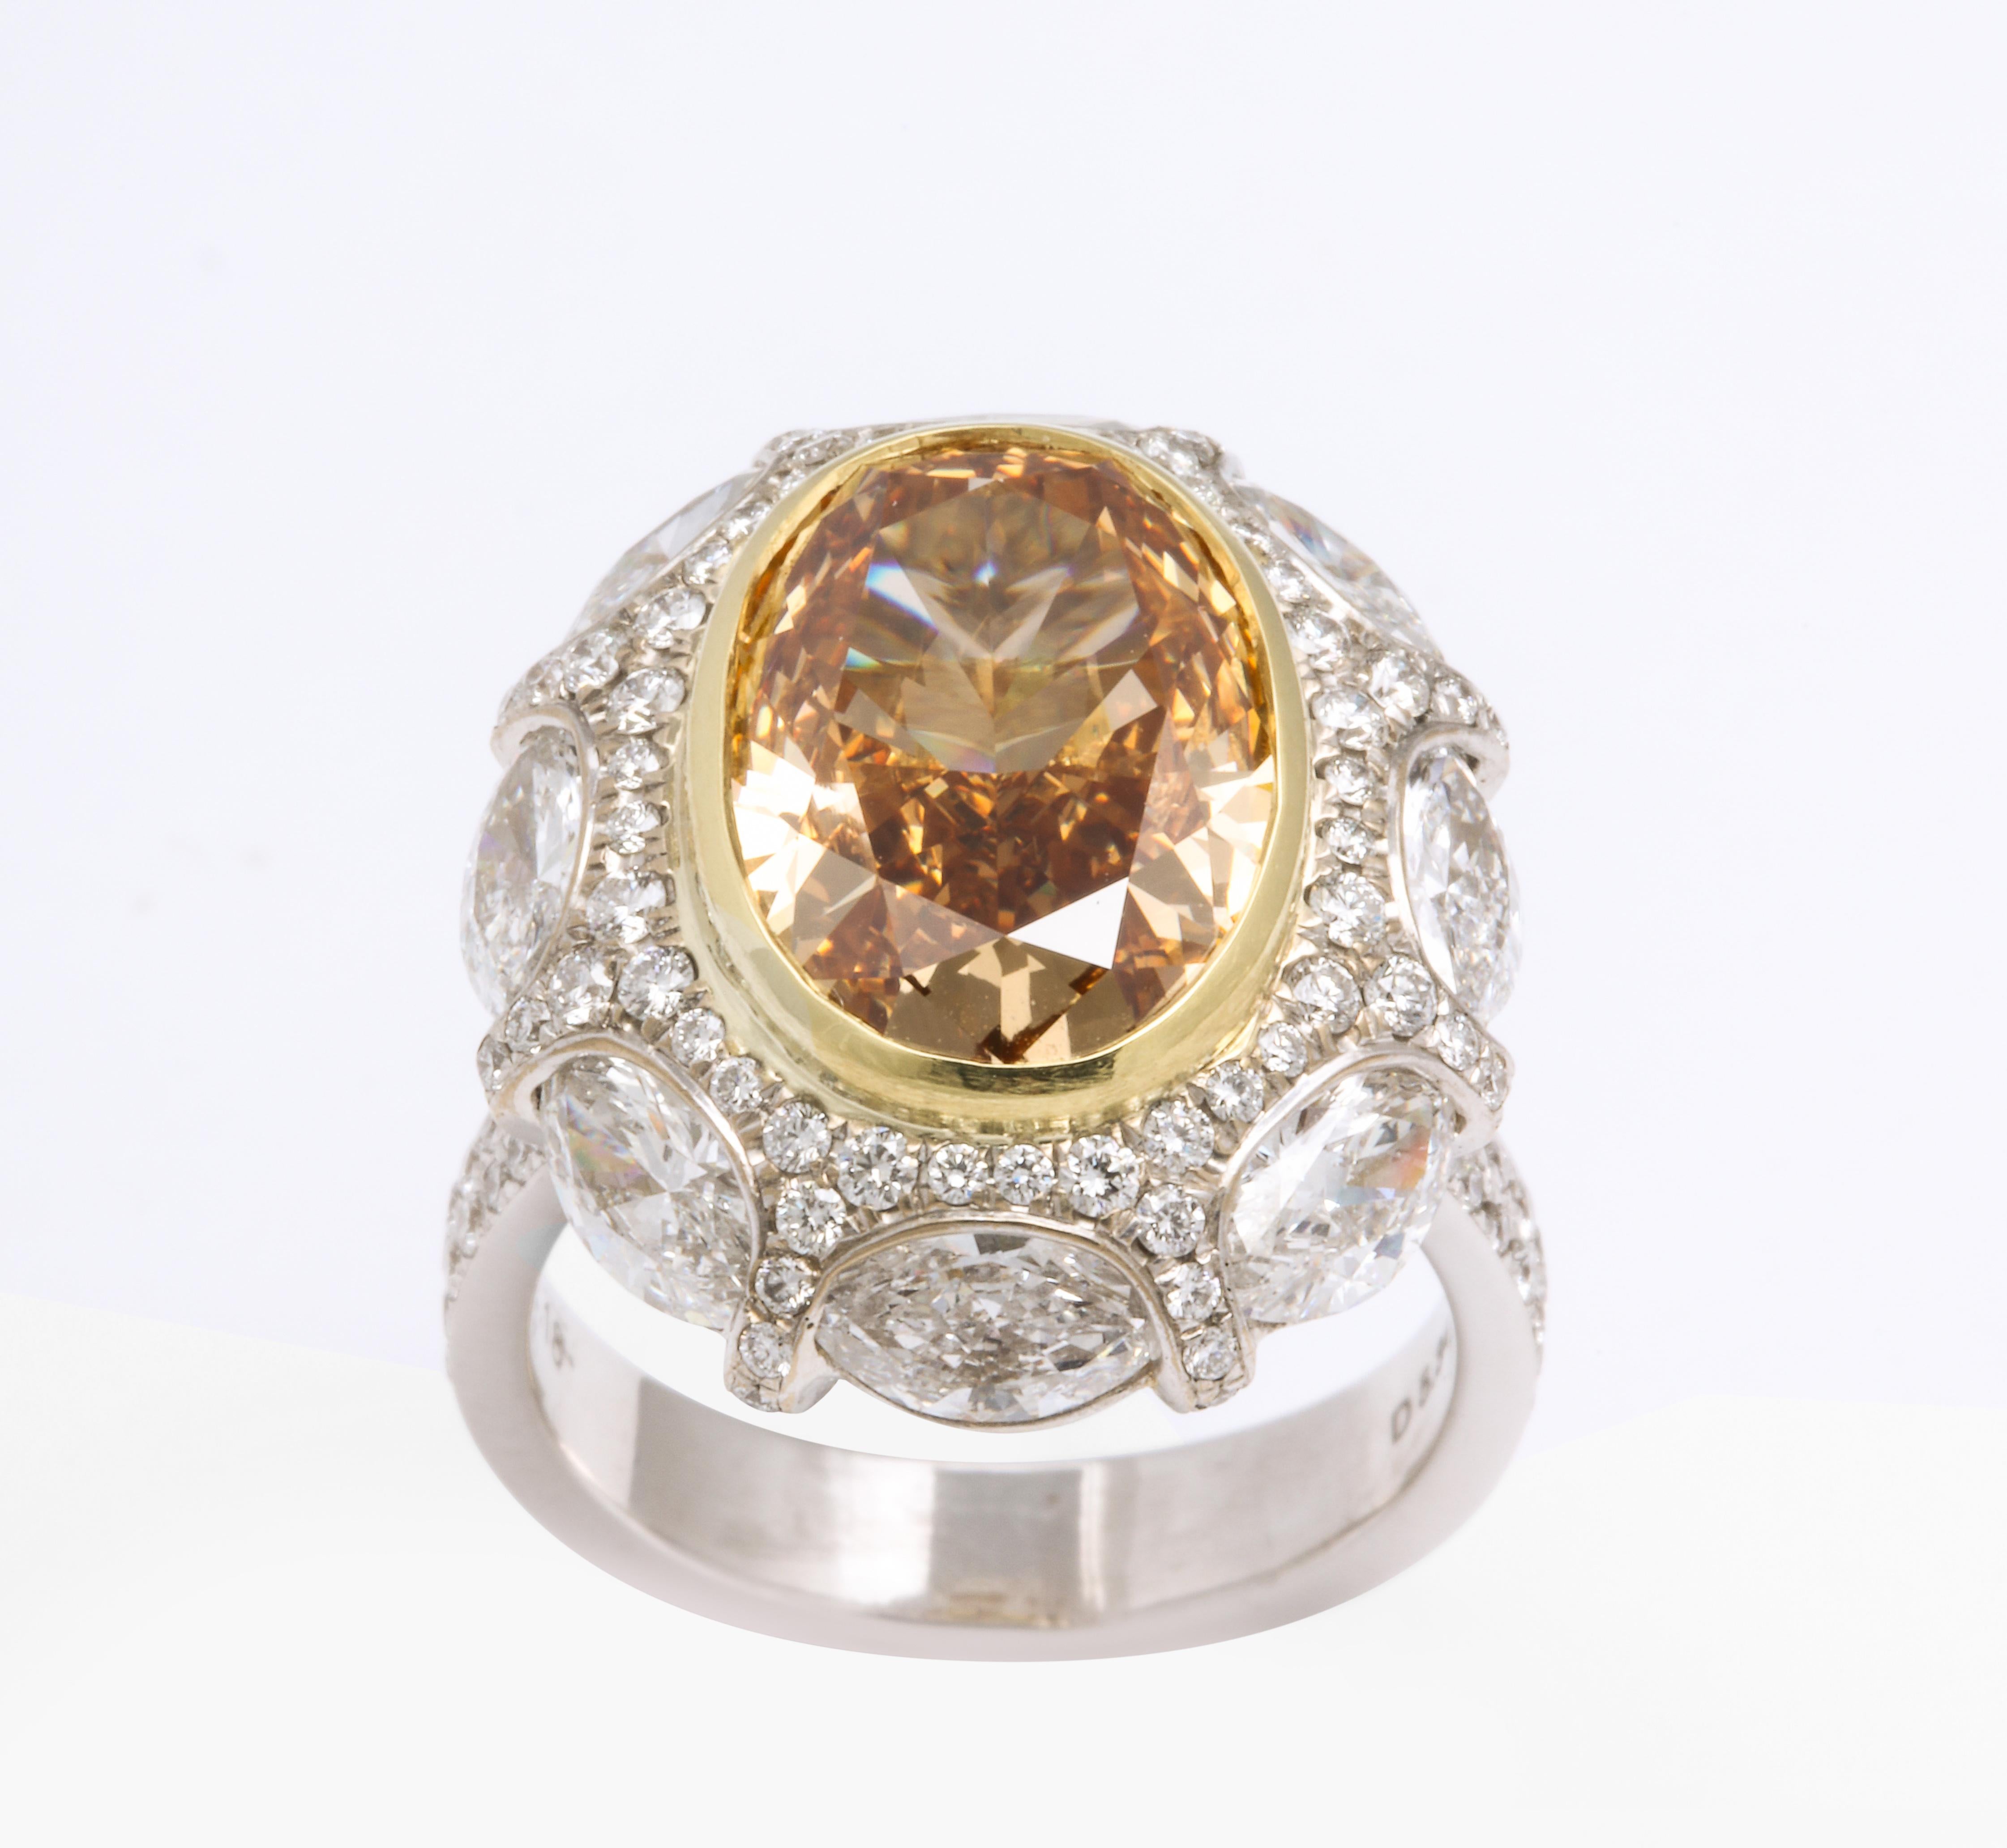 GIA 5.34 Carat Fancy Deep Brownish, Yellow Orange Diamond 18 Karat Cocktail Ring In Excellent Condition For Sale In New York, NY